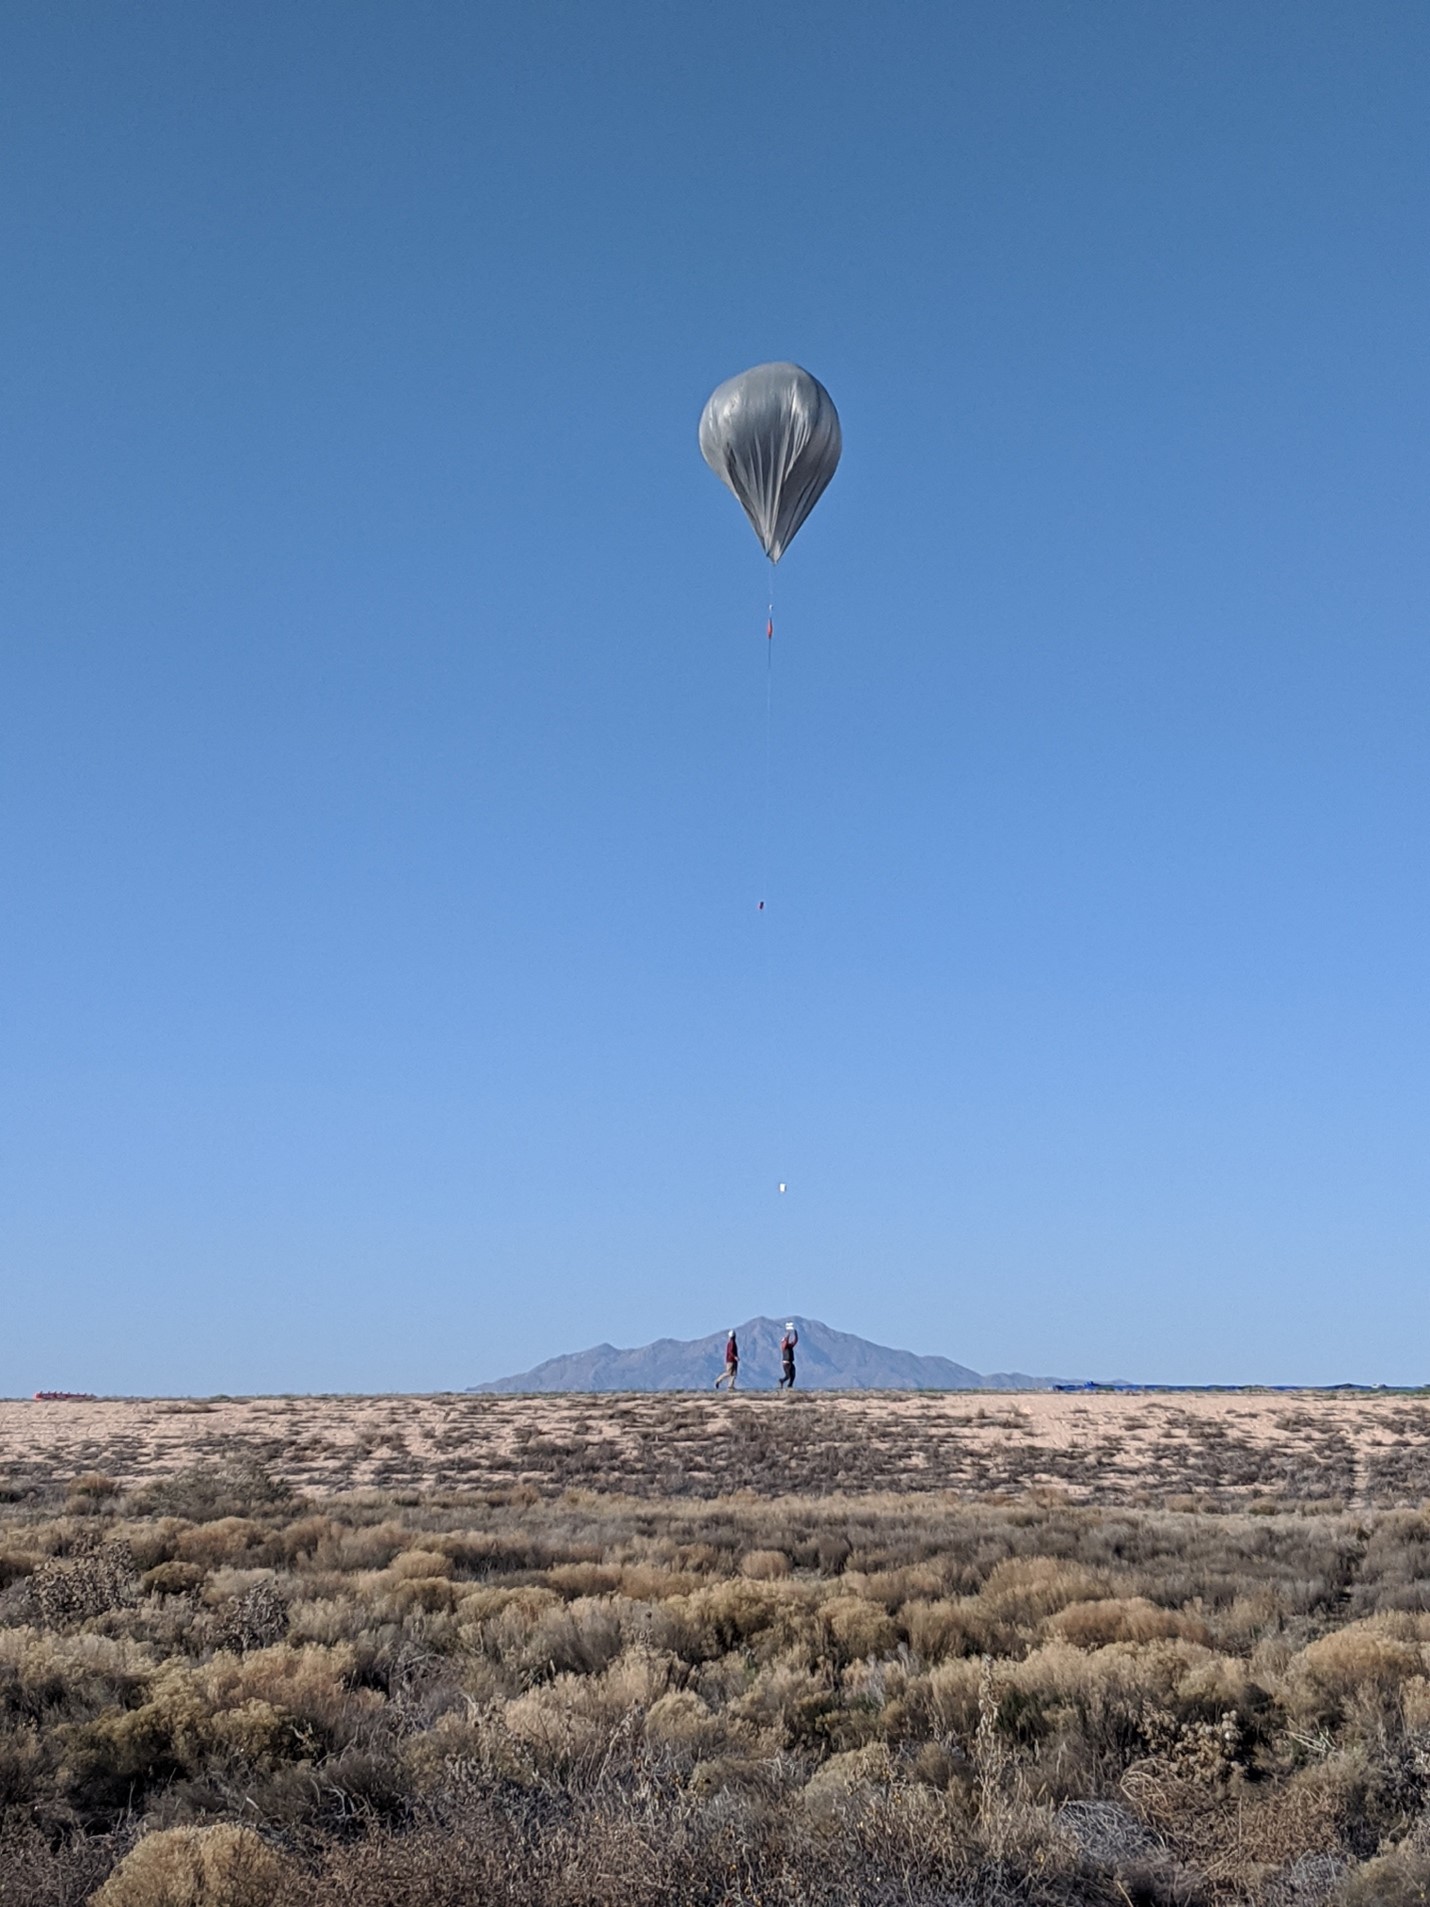 In front of a cloudless sky, a solar-powered hot air balloon floats above the desert.